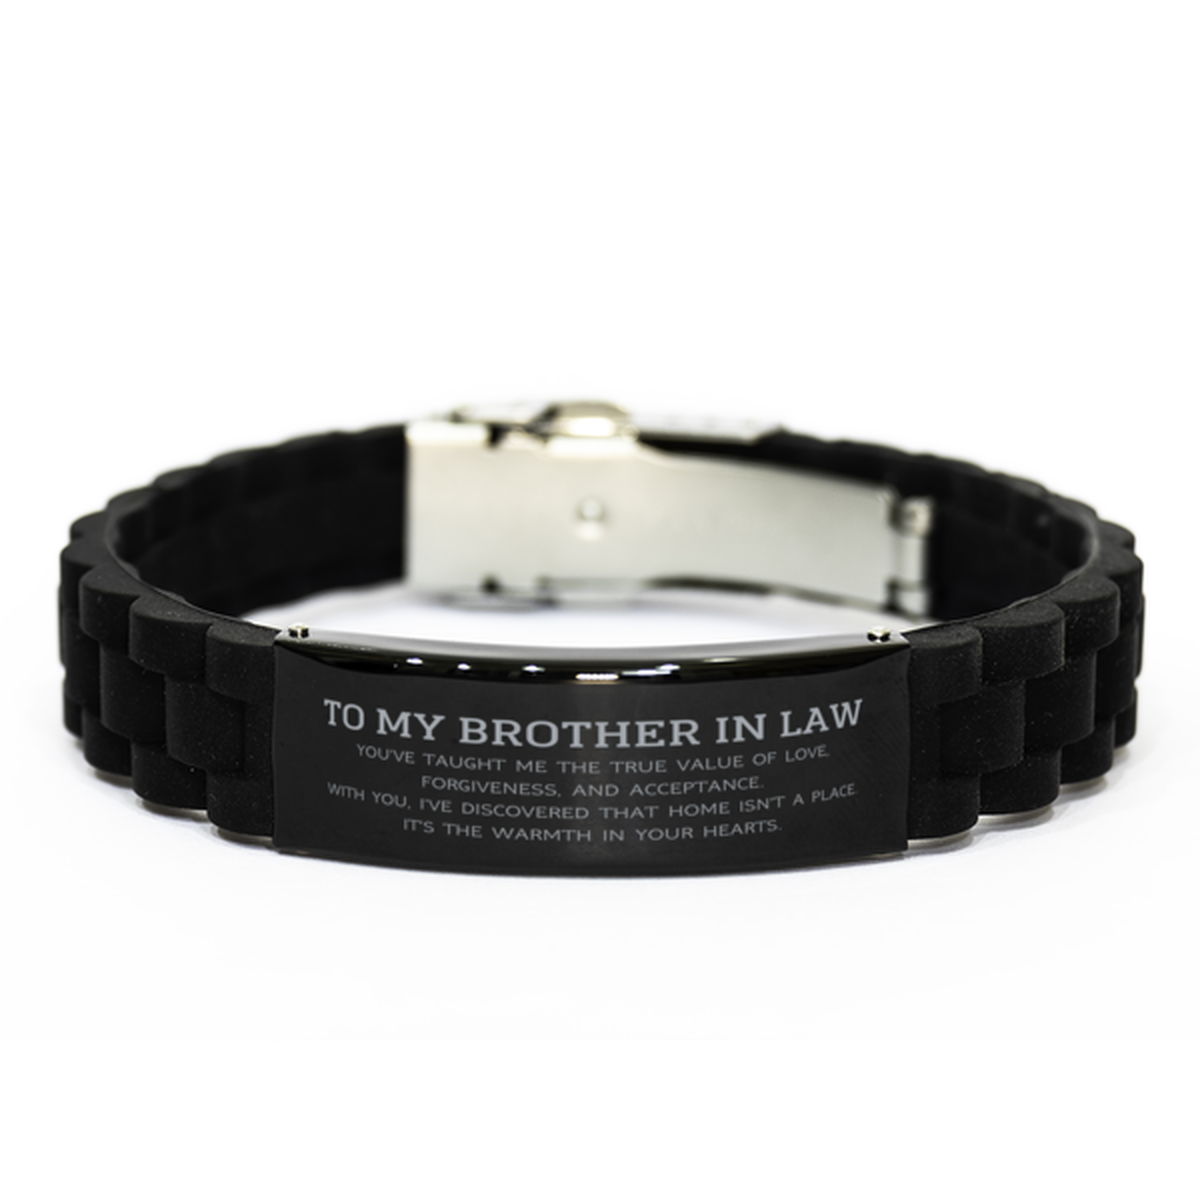 To My Brother In Law Gifts, You've taught me the true value of love, Thank You Gifts For Brother In Law, Birthday Black Glidelock Clasp Bracelet For Brother In Law